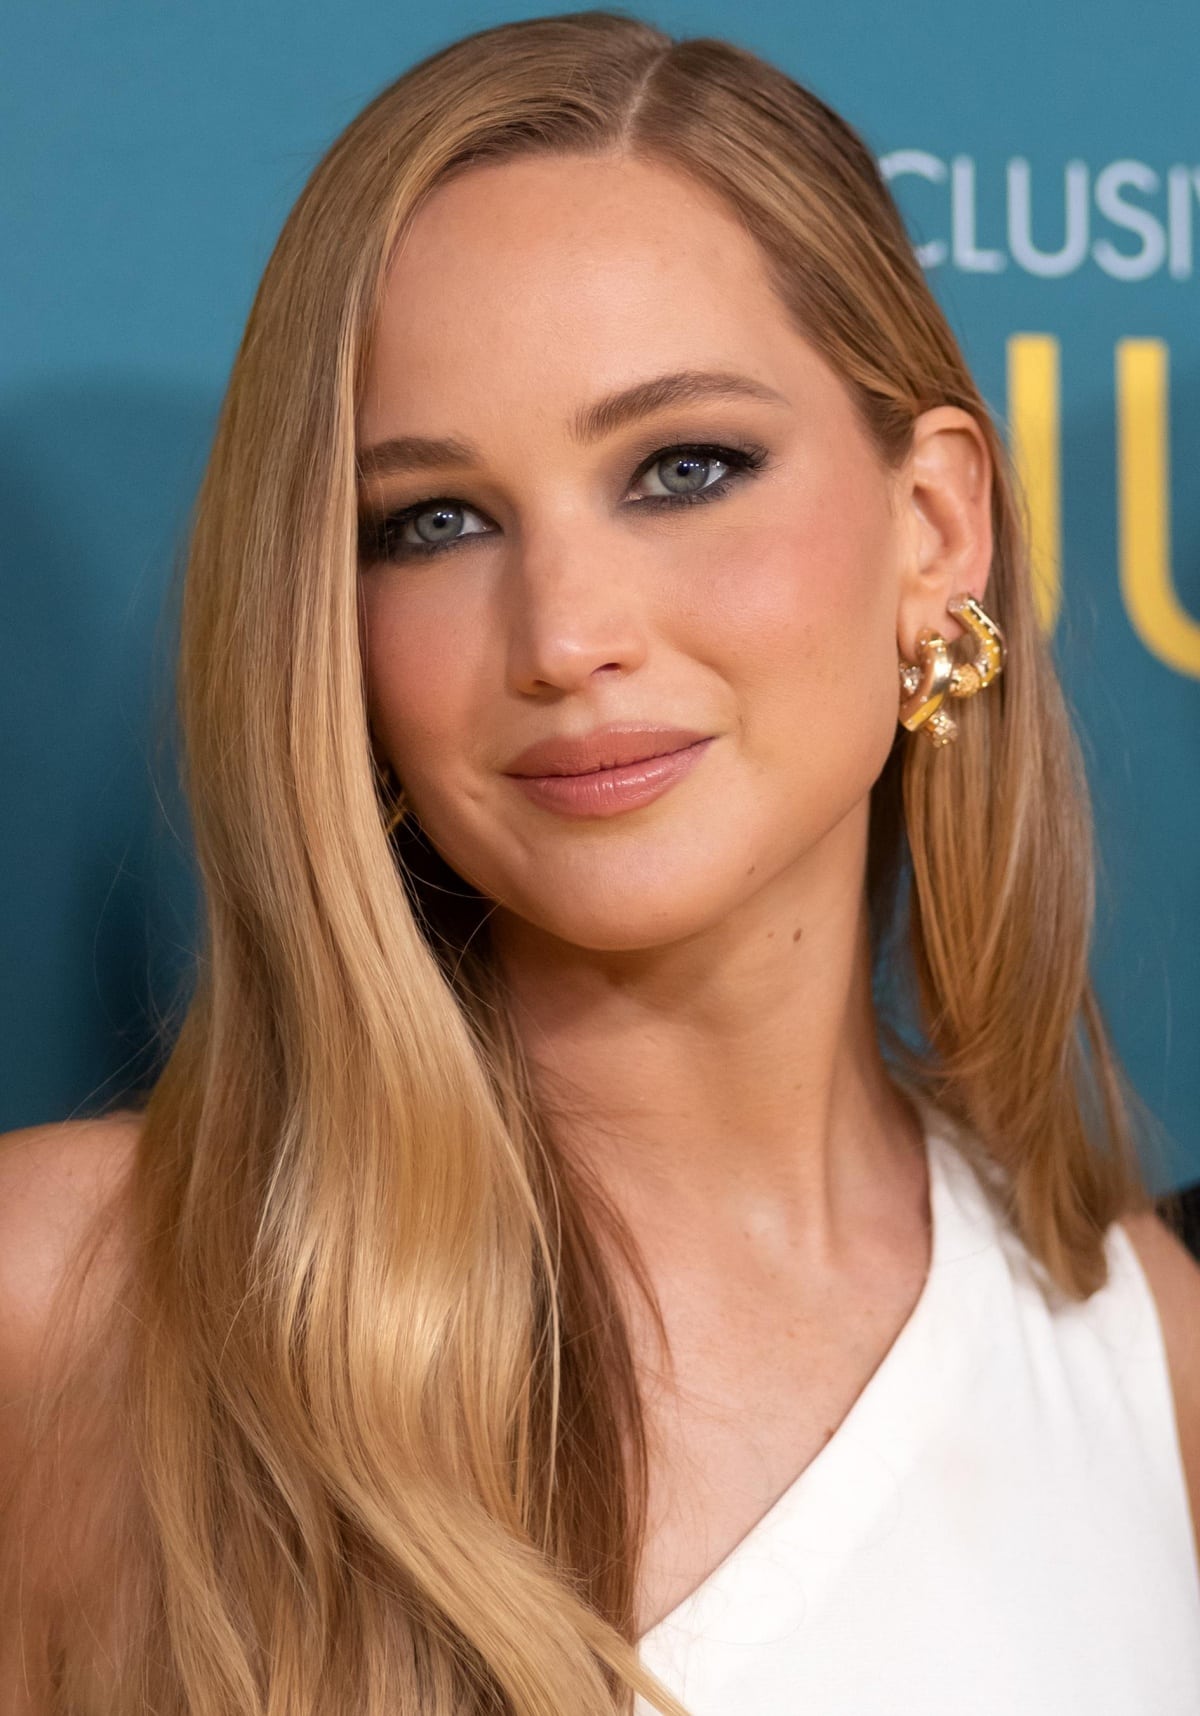 Jennifer Lawrence’s blonde locks were parted to the side in a sleek and straight hairstyle, and her flawless makeup added movie star allure to her ensemble